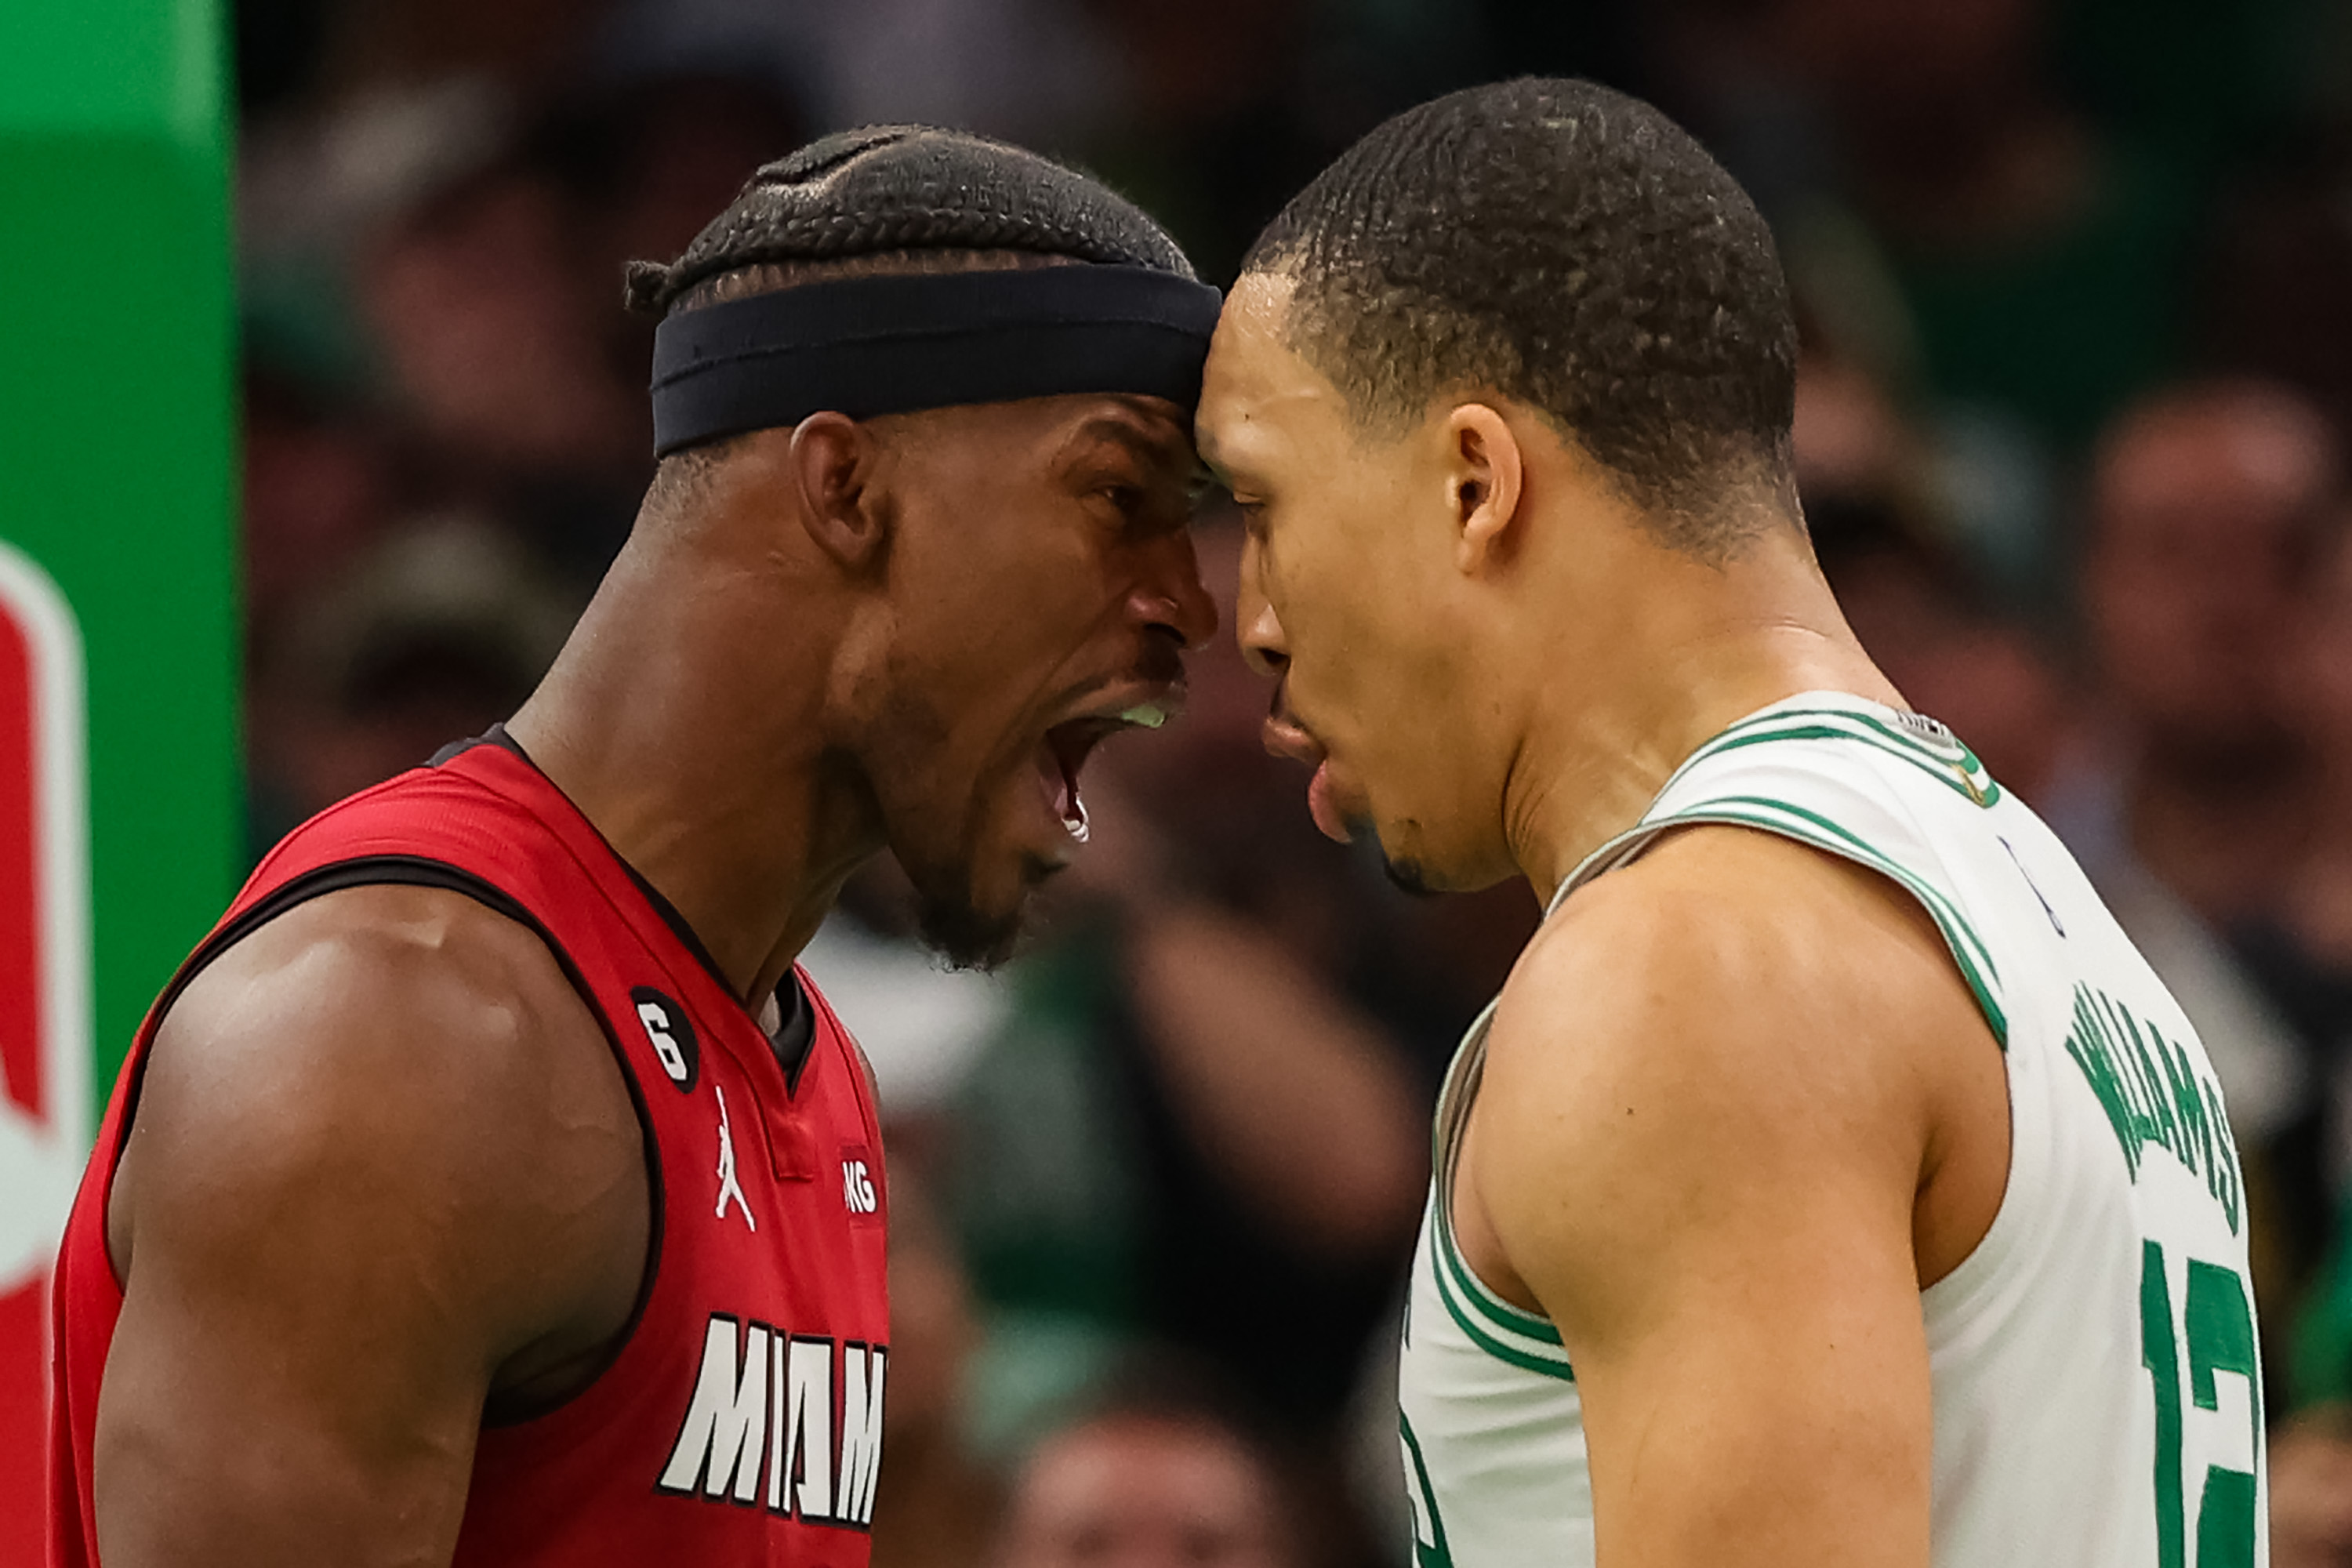 Jimmy Butler of the Miami Heat exchanges words with Grant Williams of the Boston Celtics.